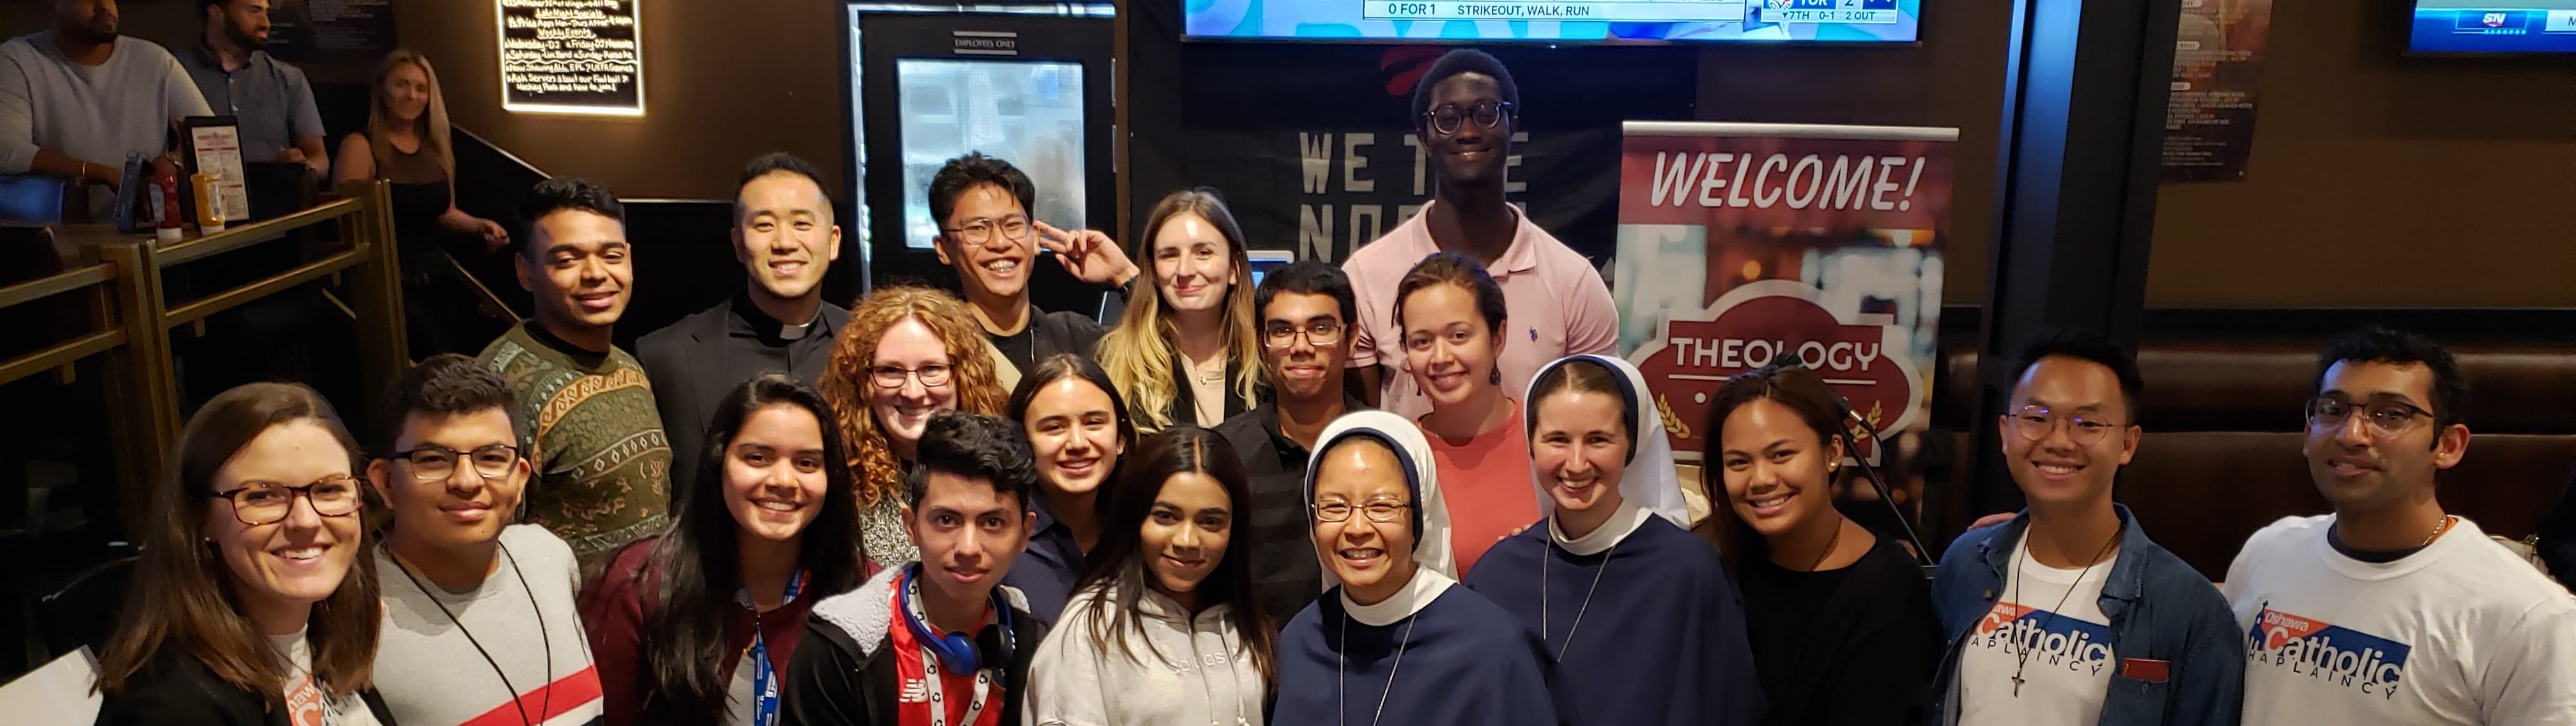 Adult Catholic Ministry Young